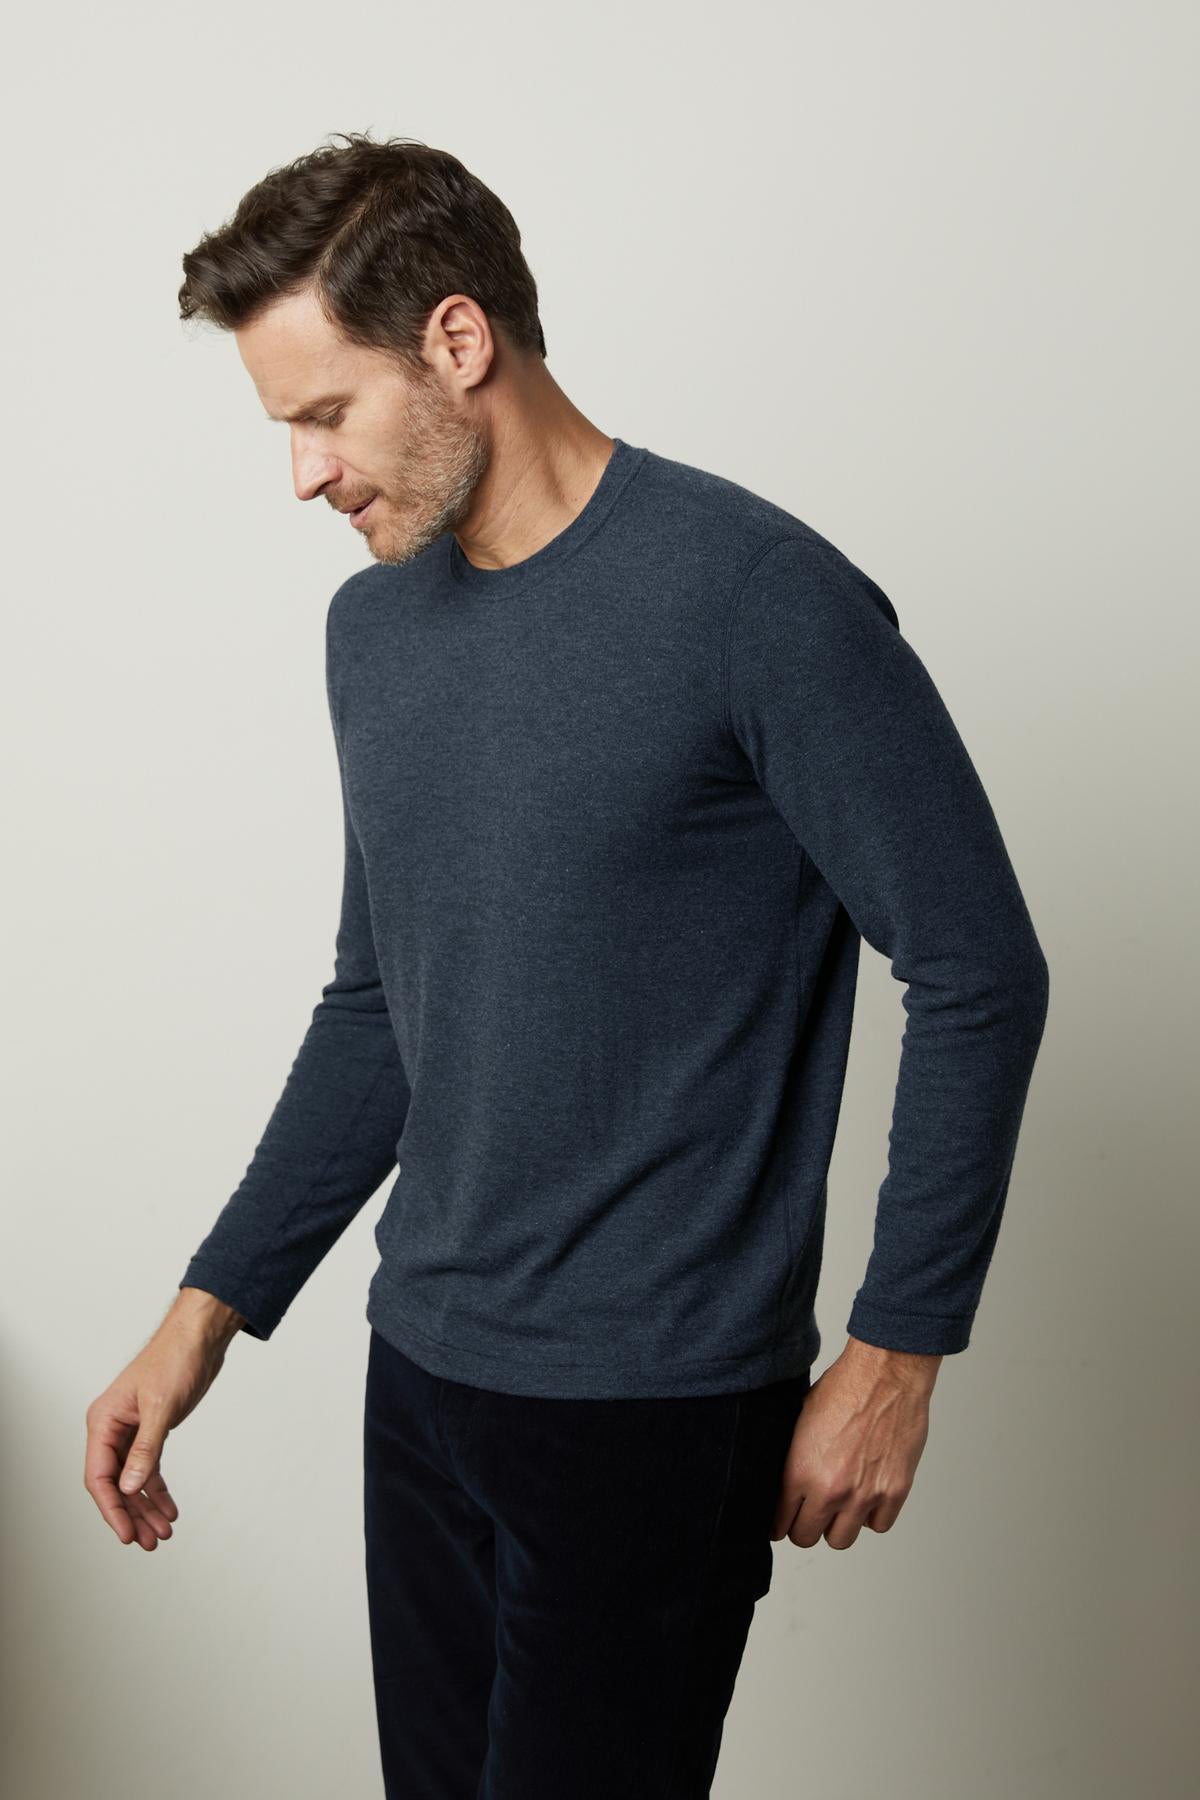 A man in a Velvet by Graham & Spencer BECKER COZY JERSEY CREW sweater and soft black pants.-36320567951553